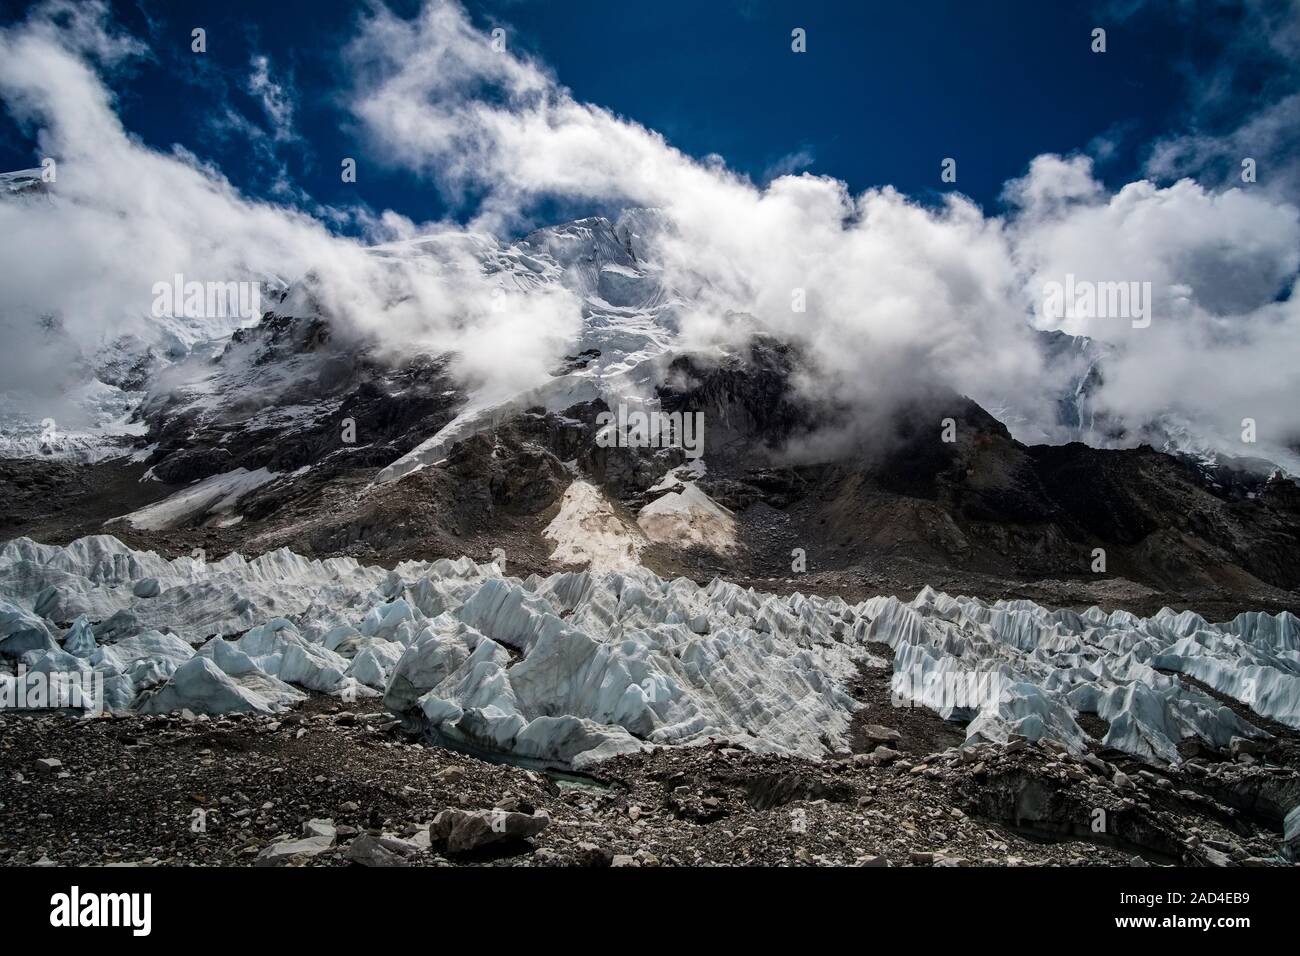 Ice formations on Khumbu glacier, Mt. Everest behind covered by monsoon clouds Stock Photo